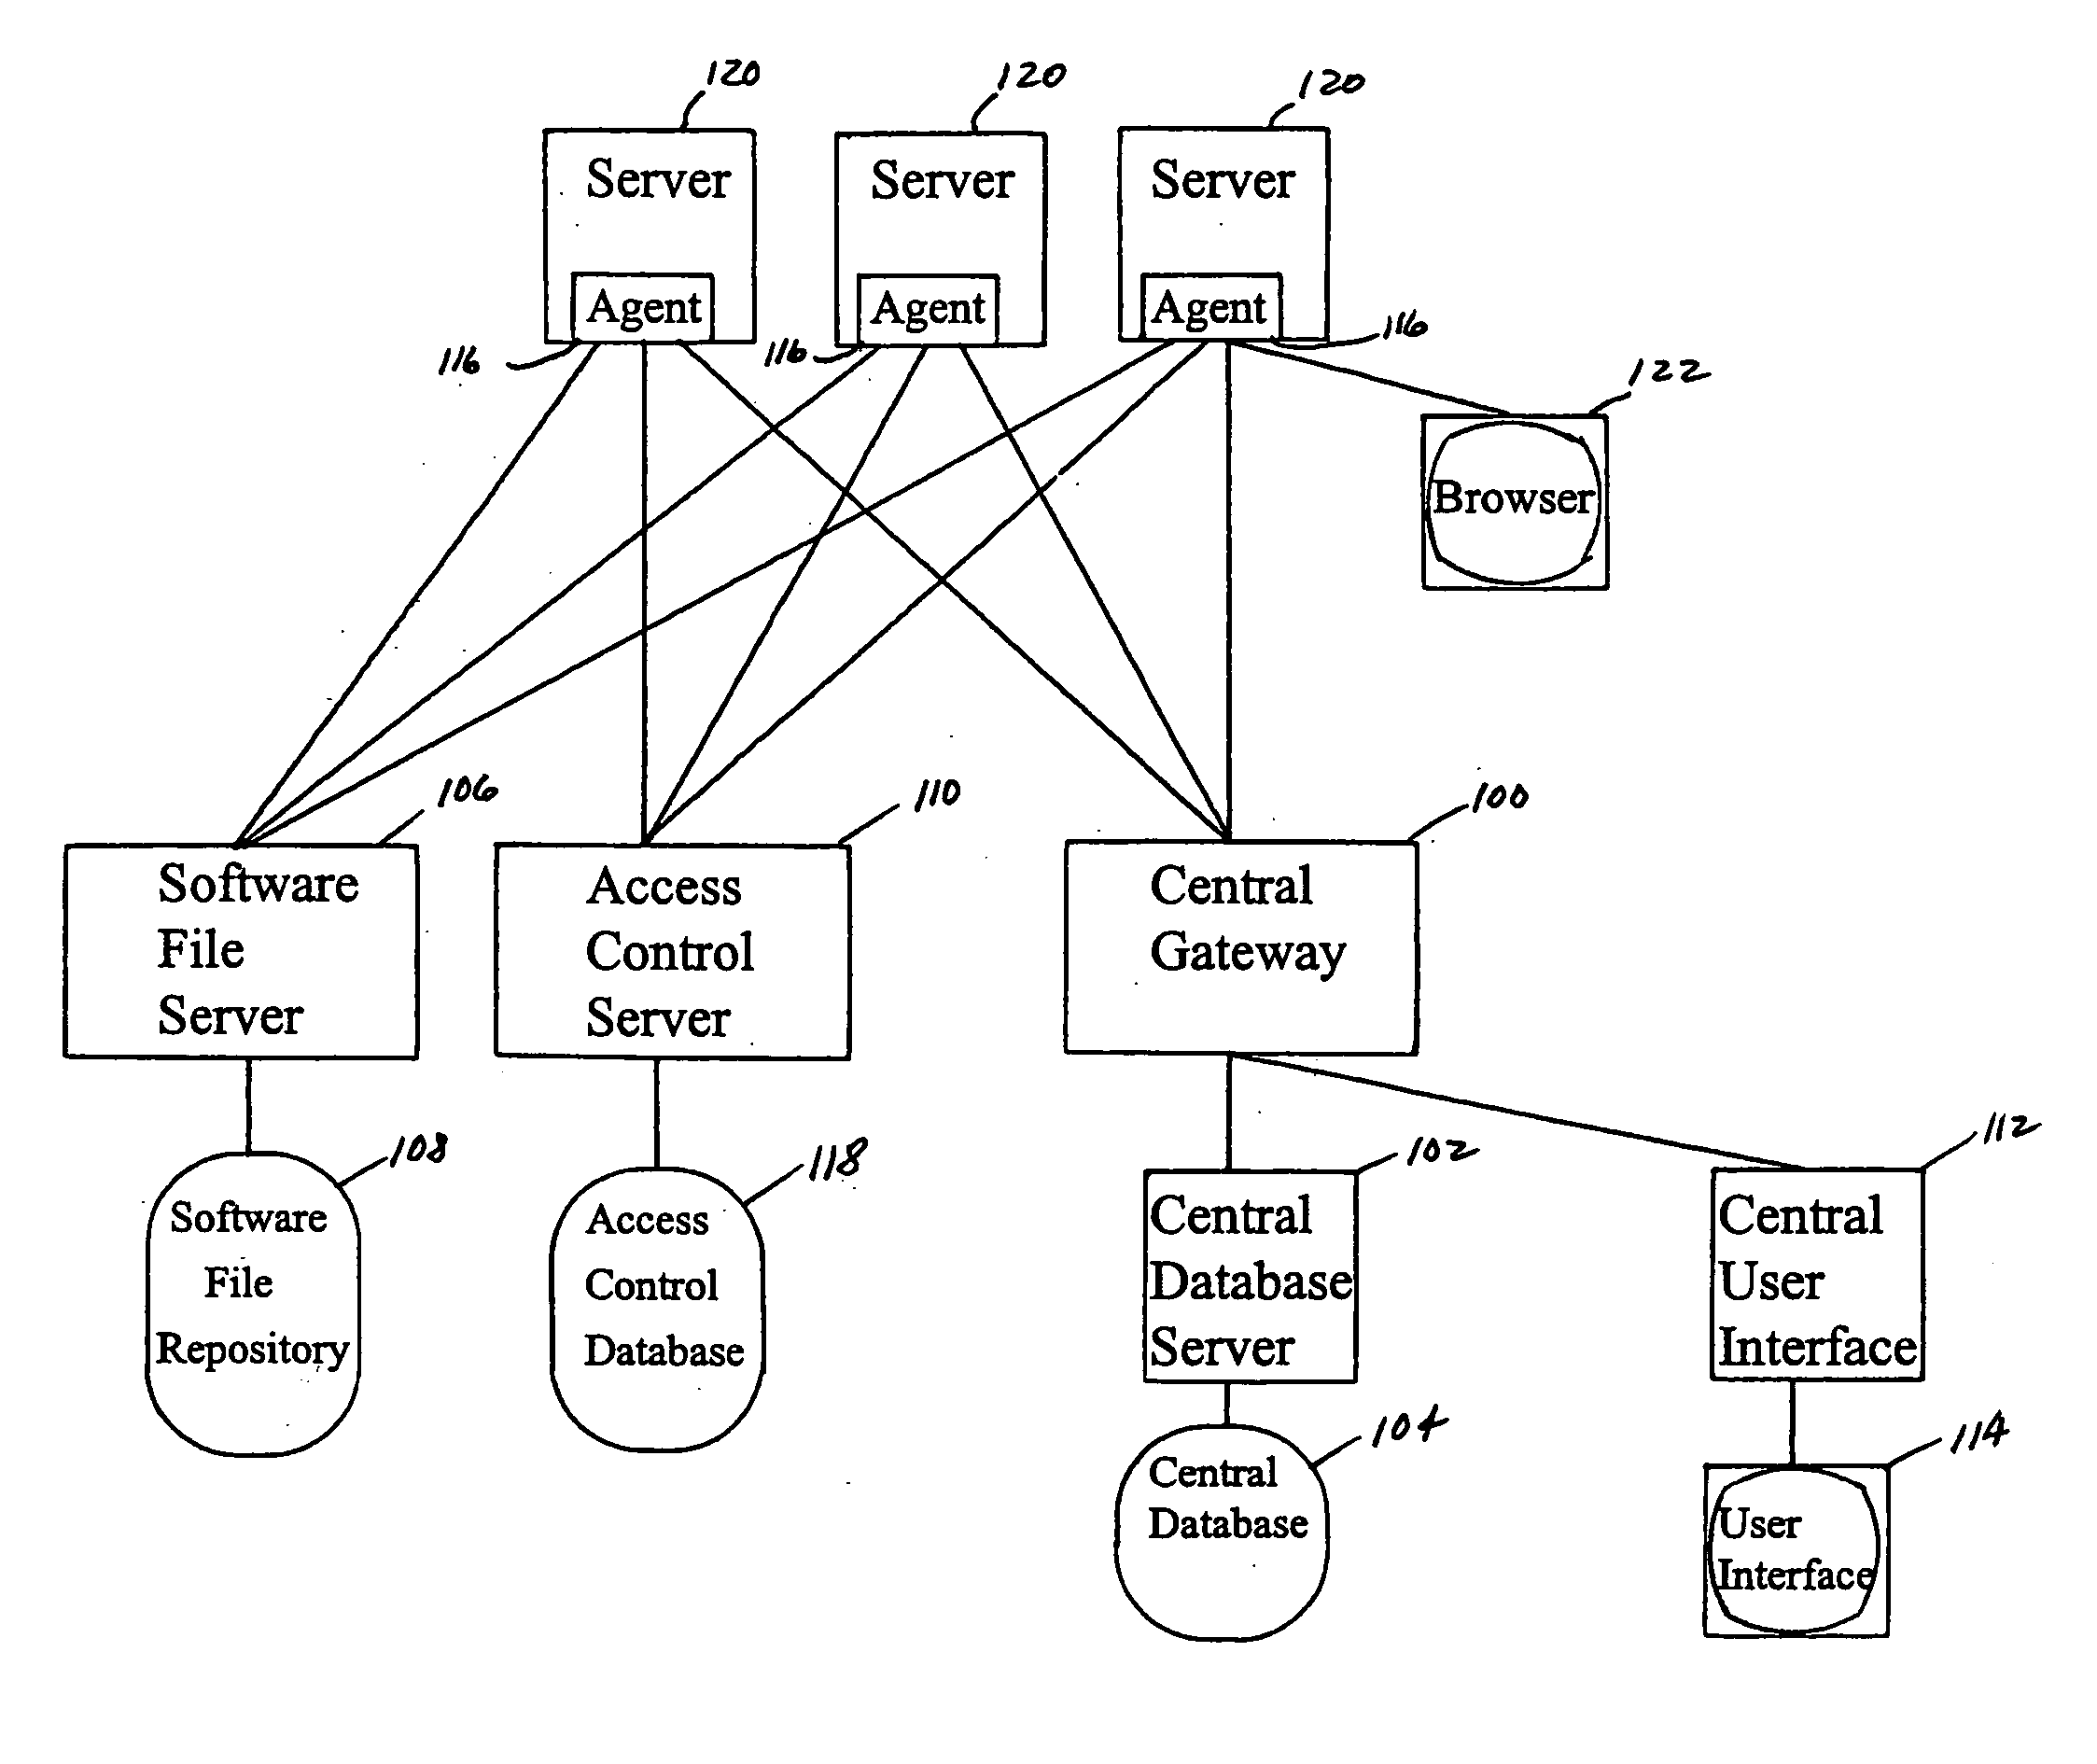 System for registering, locating, and identifying network equipment